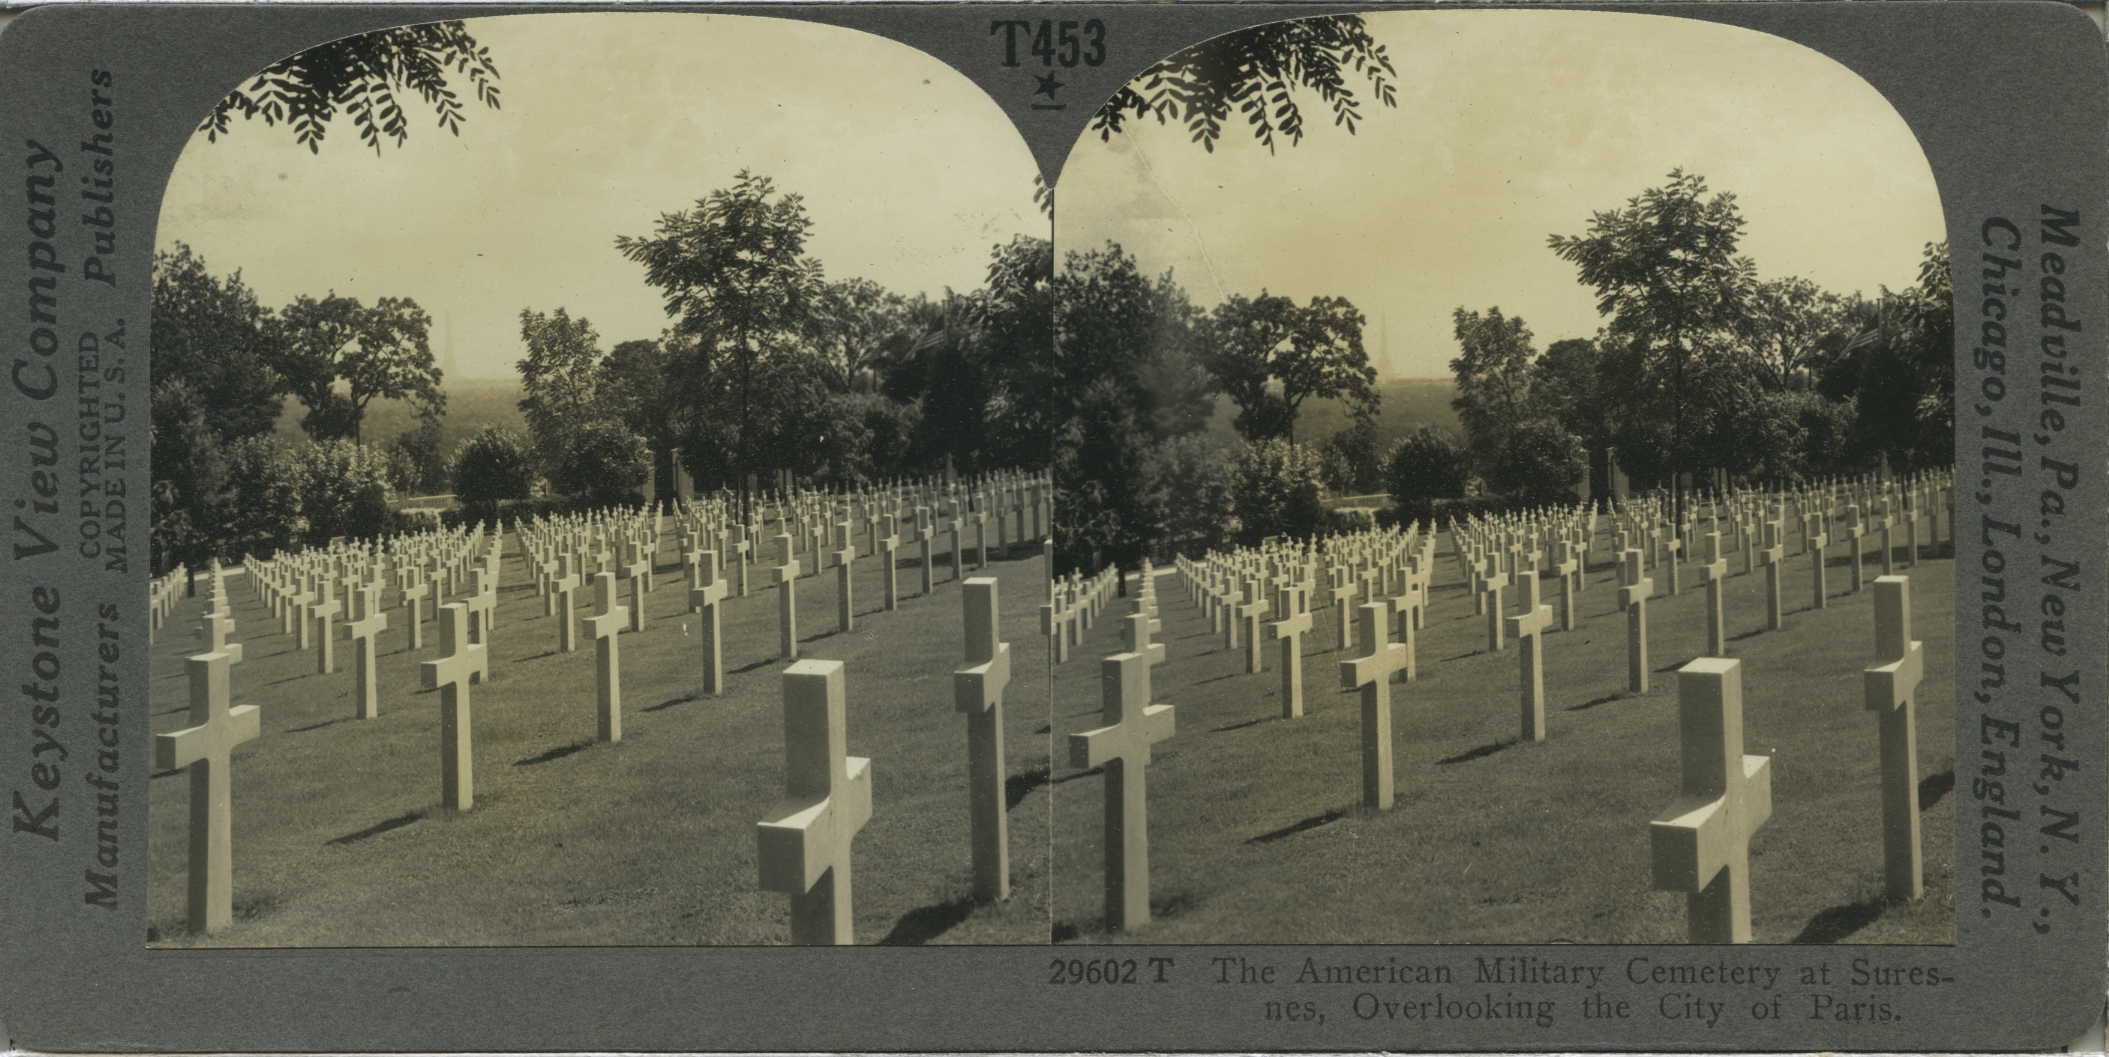 The American Military Cemetery at Suresnes, Overlooking the City of Paris